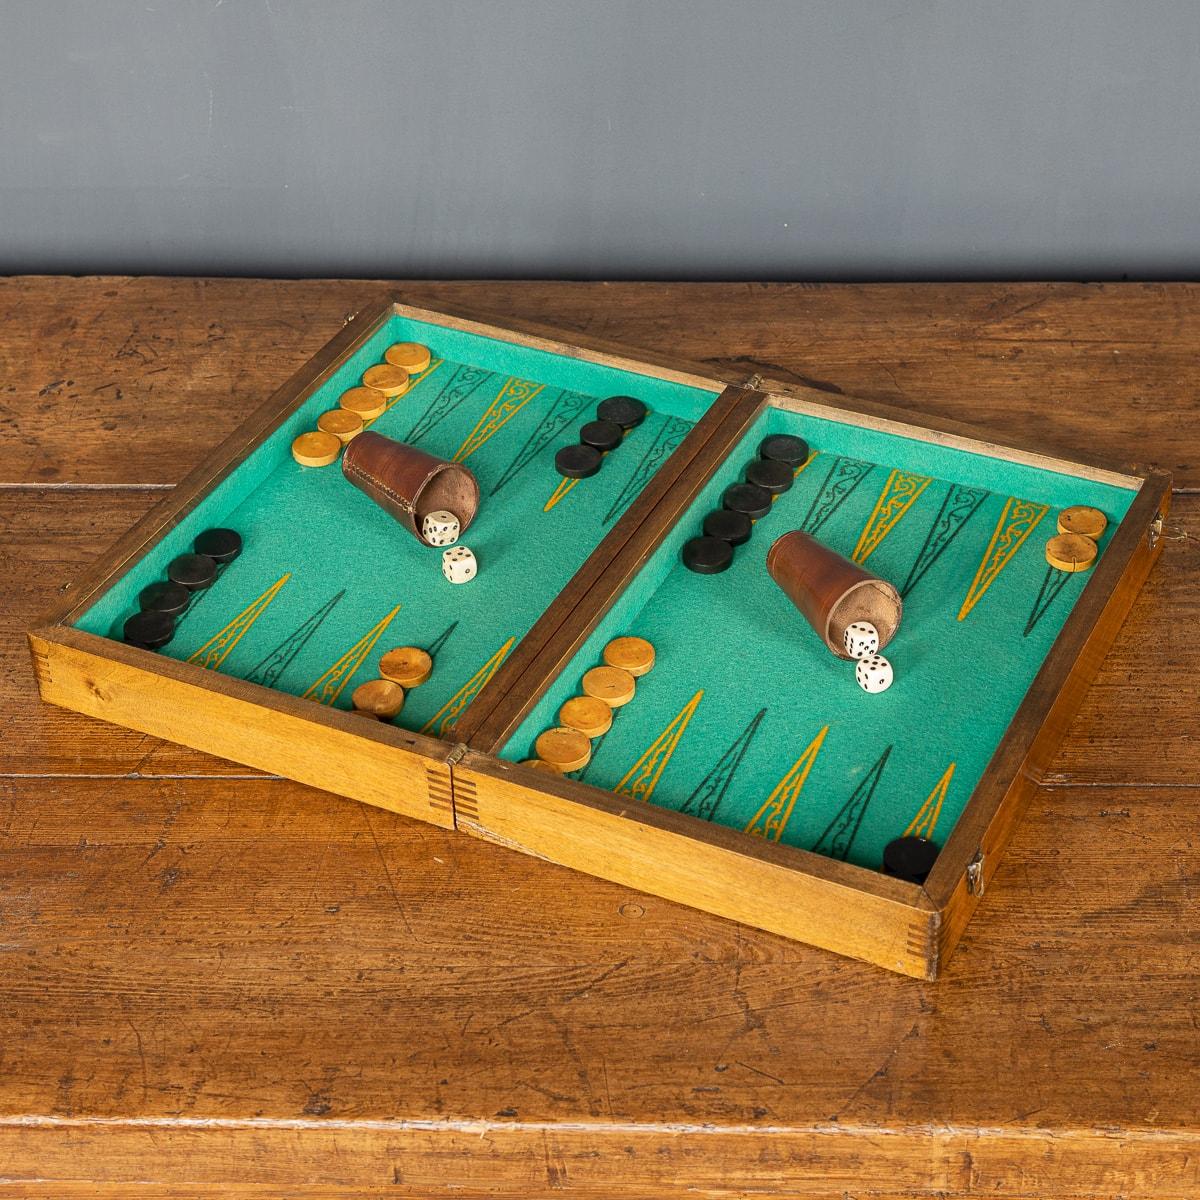 Mid-20th century British made backgammon and draughts game box. A superb gift and a must have item during the festive holidays, that will make a real conversation piece and a superb piece of history reminiscent of the bygone era.

CONDITION
In